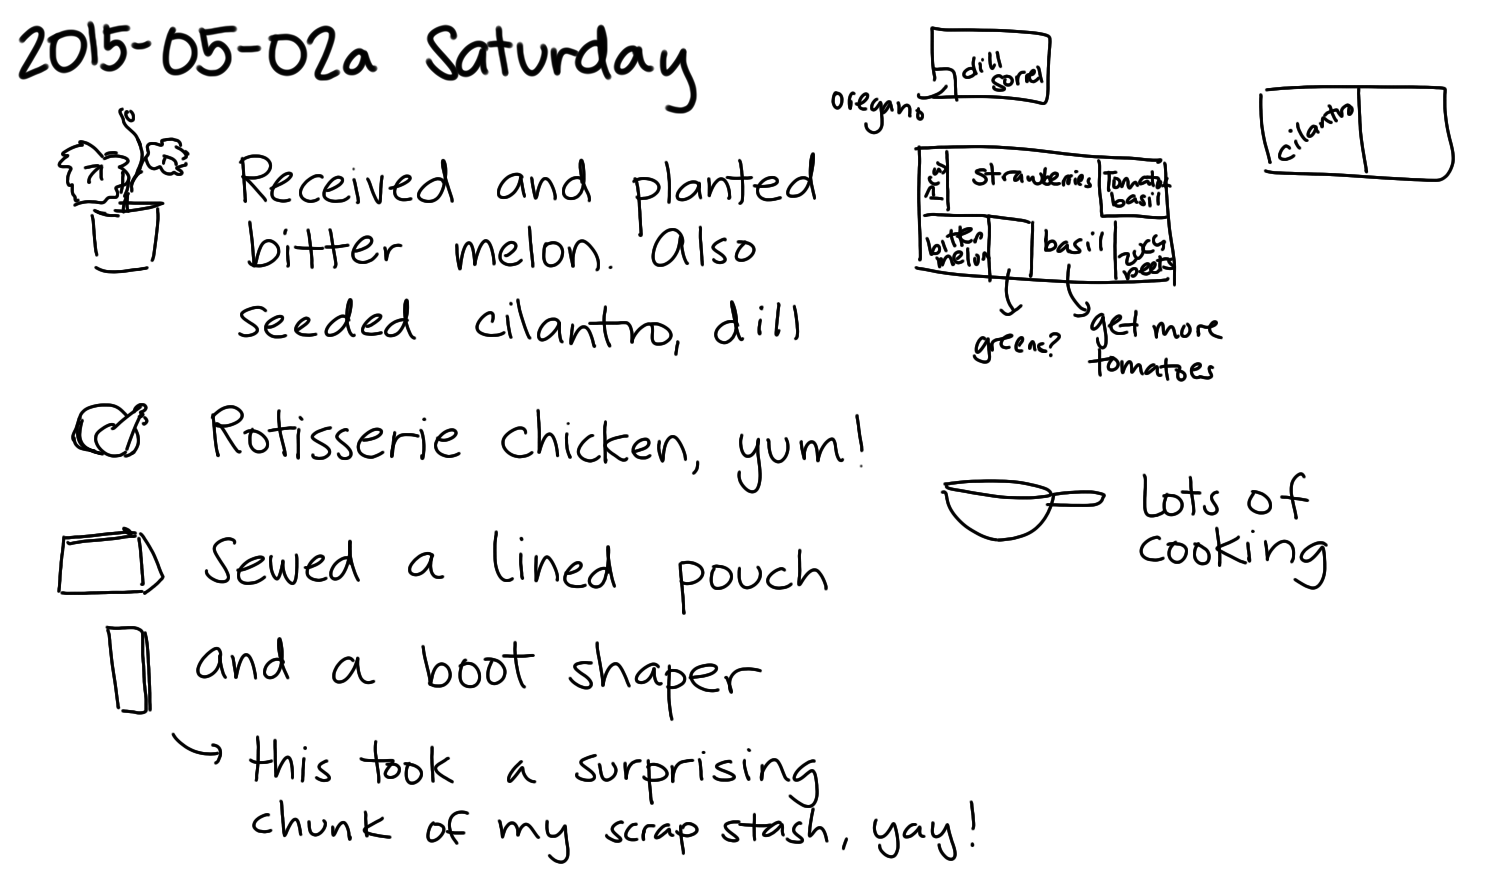 2015-05-02a Saturday -- index card #journal.png